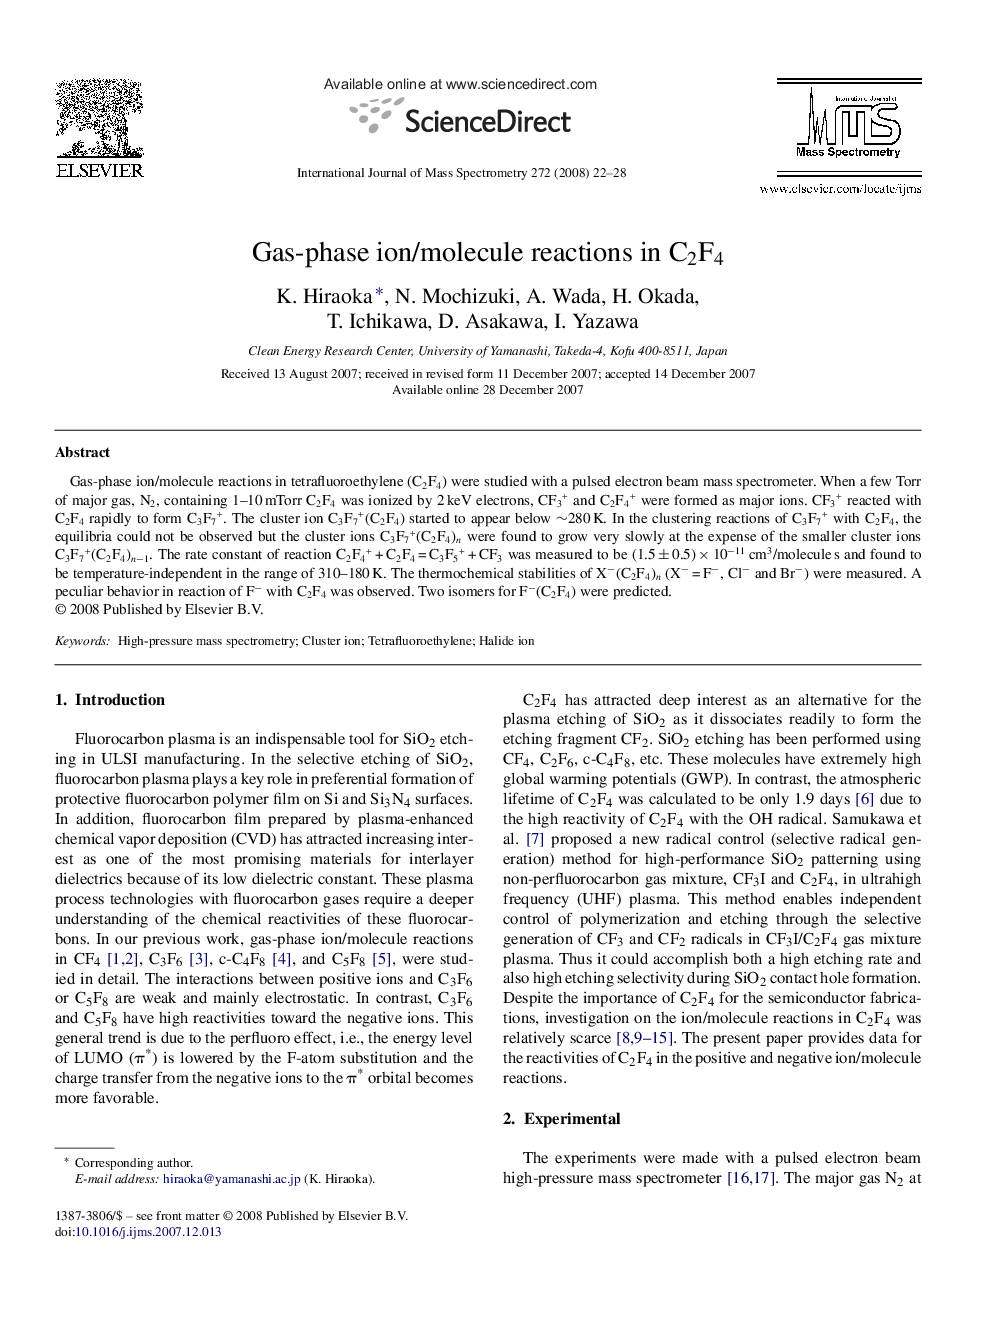 Gas-phase ion/molecule reactions in C2F4